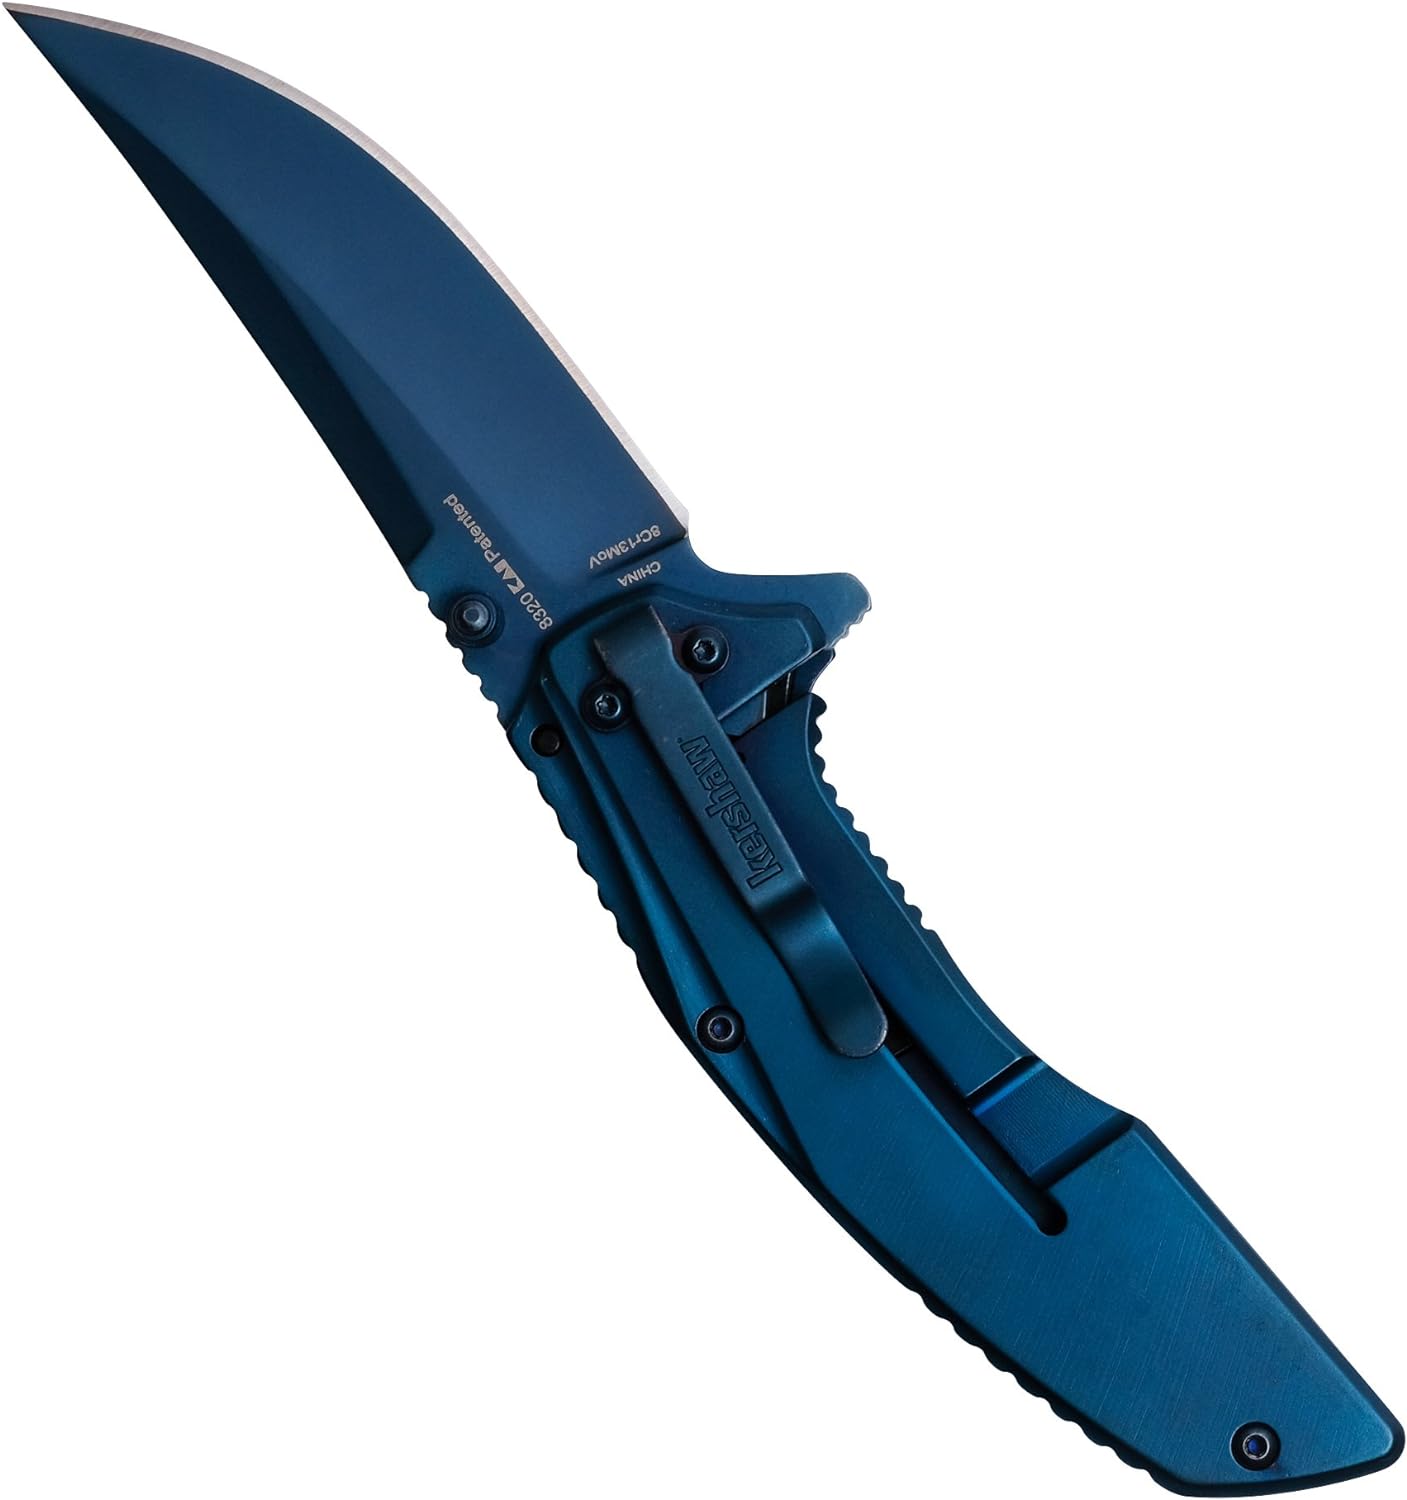 Kershaw Outright Pocketknife (8320); 3-inch Upswept 8Cr13MoV Steel Blade in Brilliant Blue; PVD Coated Steel Handle with G10 Front Over